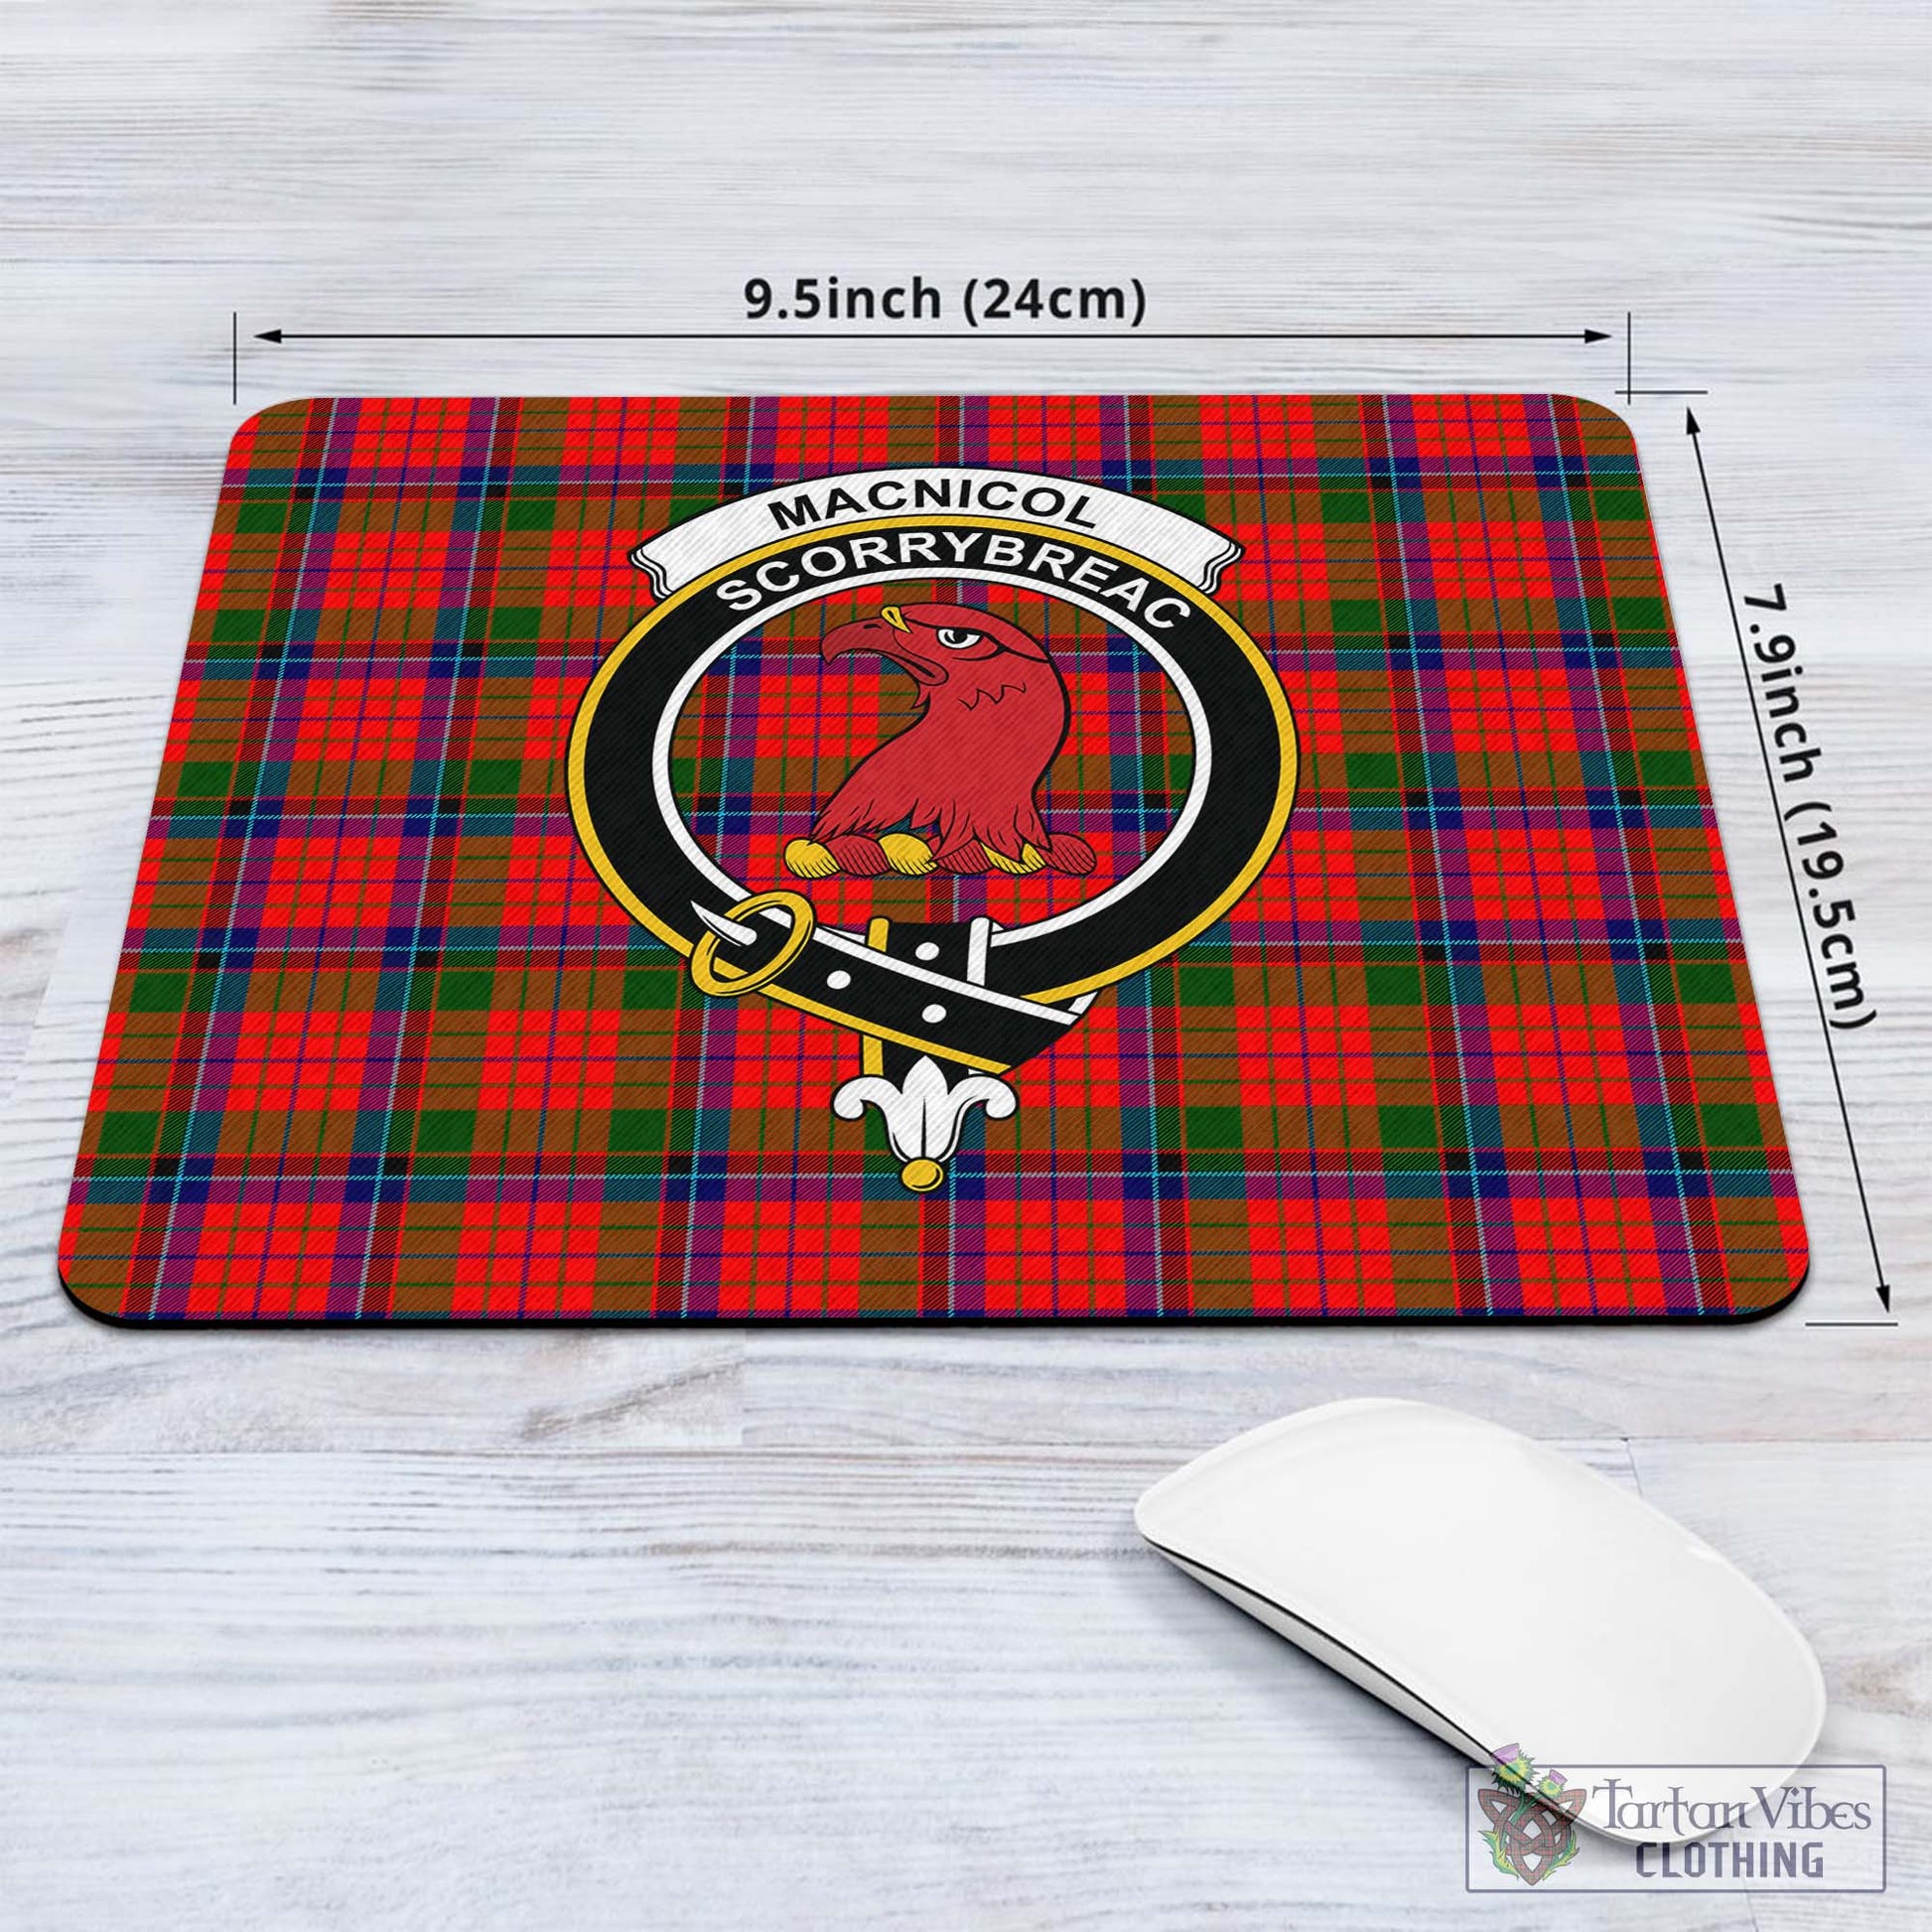 Tartan Vibes Clothing MacNicol of Scorrybreac Tartan Mouse Pad with Family Crest